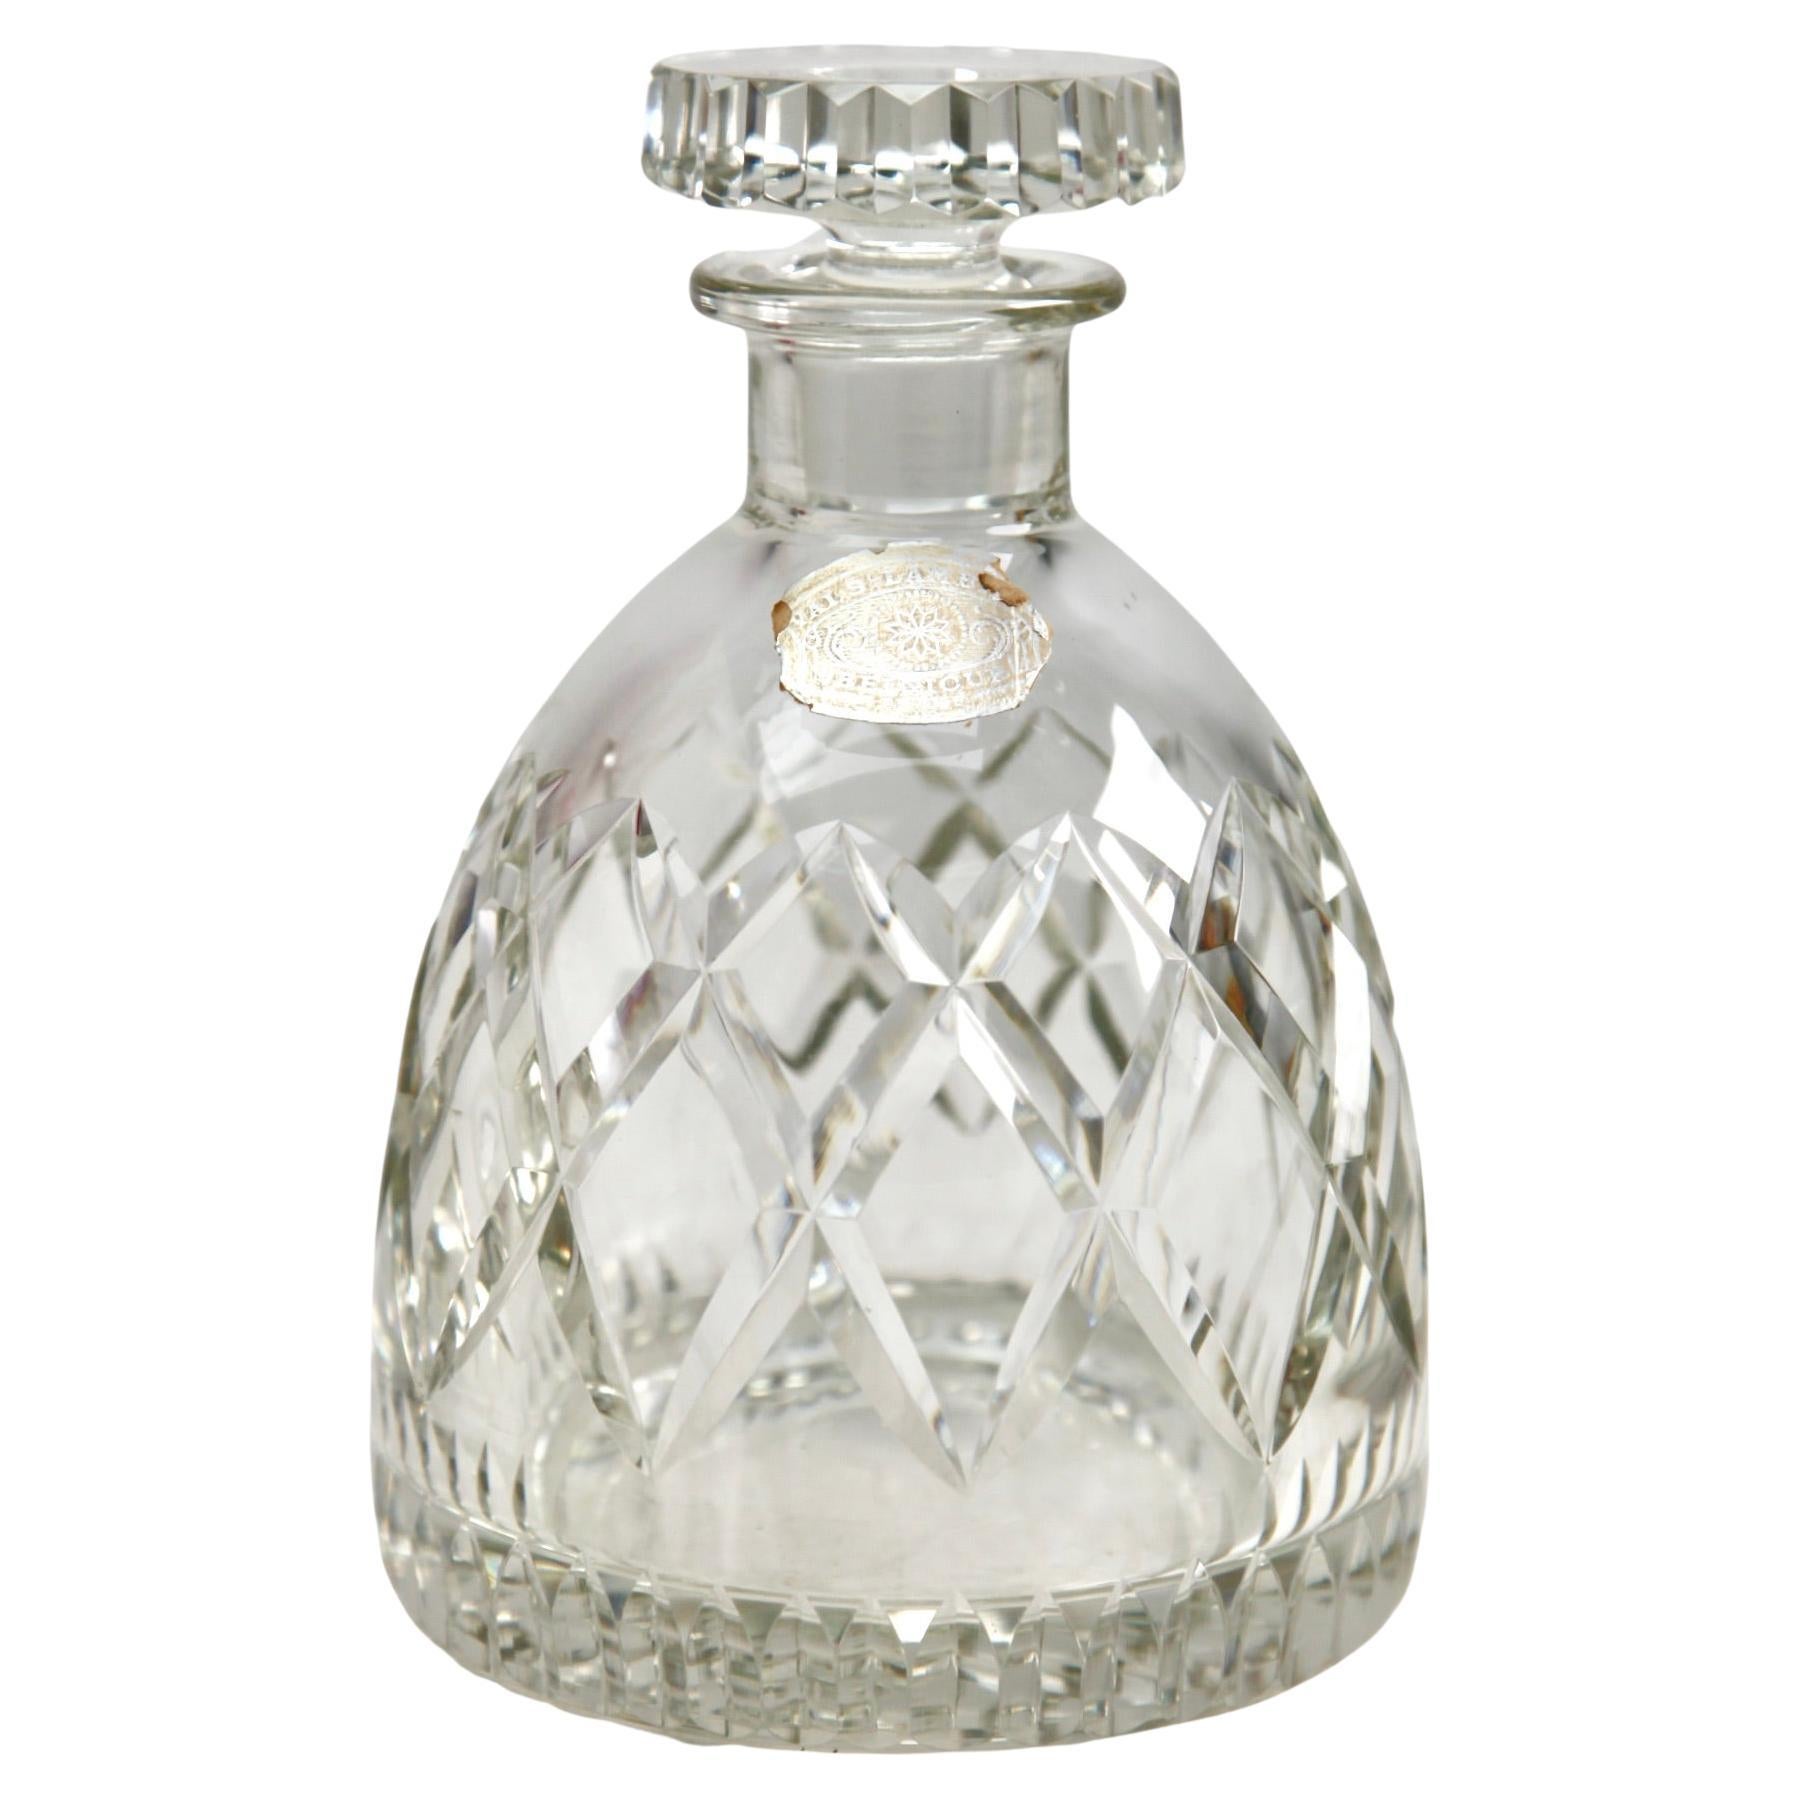 Val Saint Lambert cut-crystal decanter, 20th century
Looks simply stunning.
Val Saint Lambert is a Belgian crystal glassware manufacturer, founded in 1826 and based in Seraing. It is the official glassware supplier to King Albert II. A tall cut